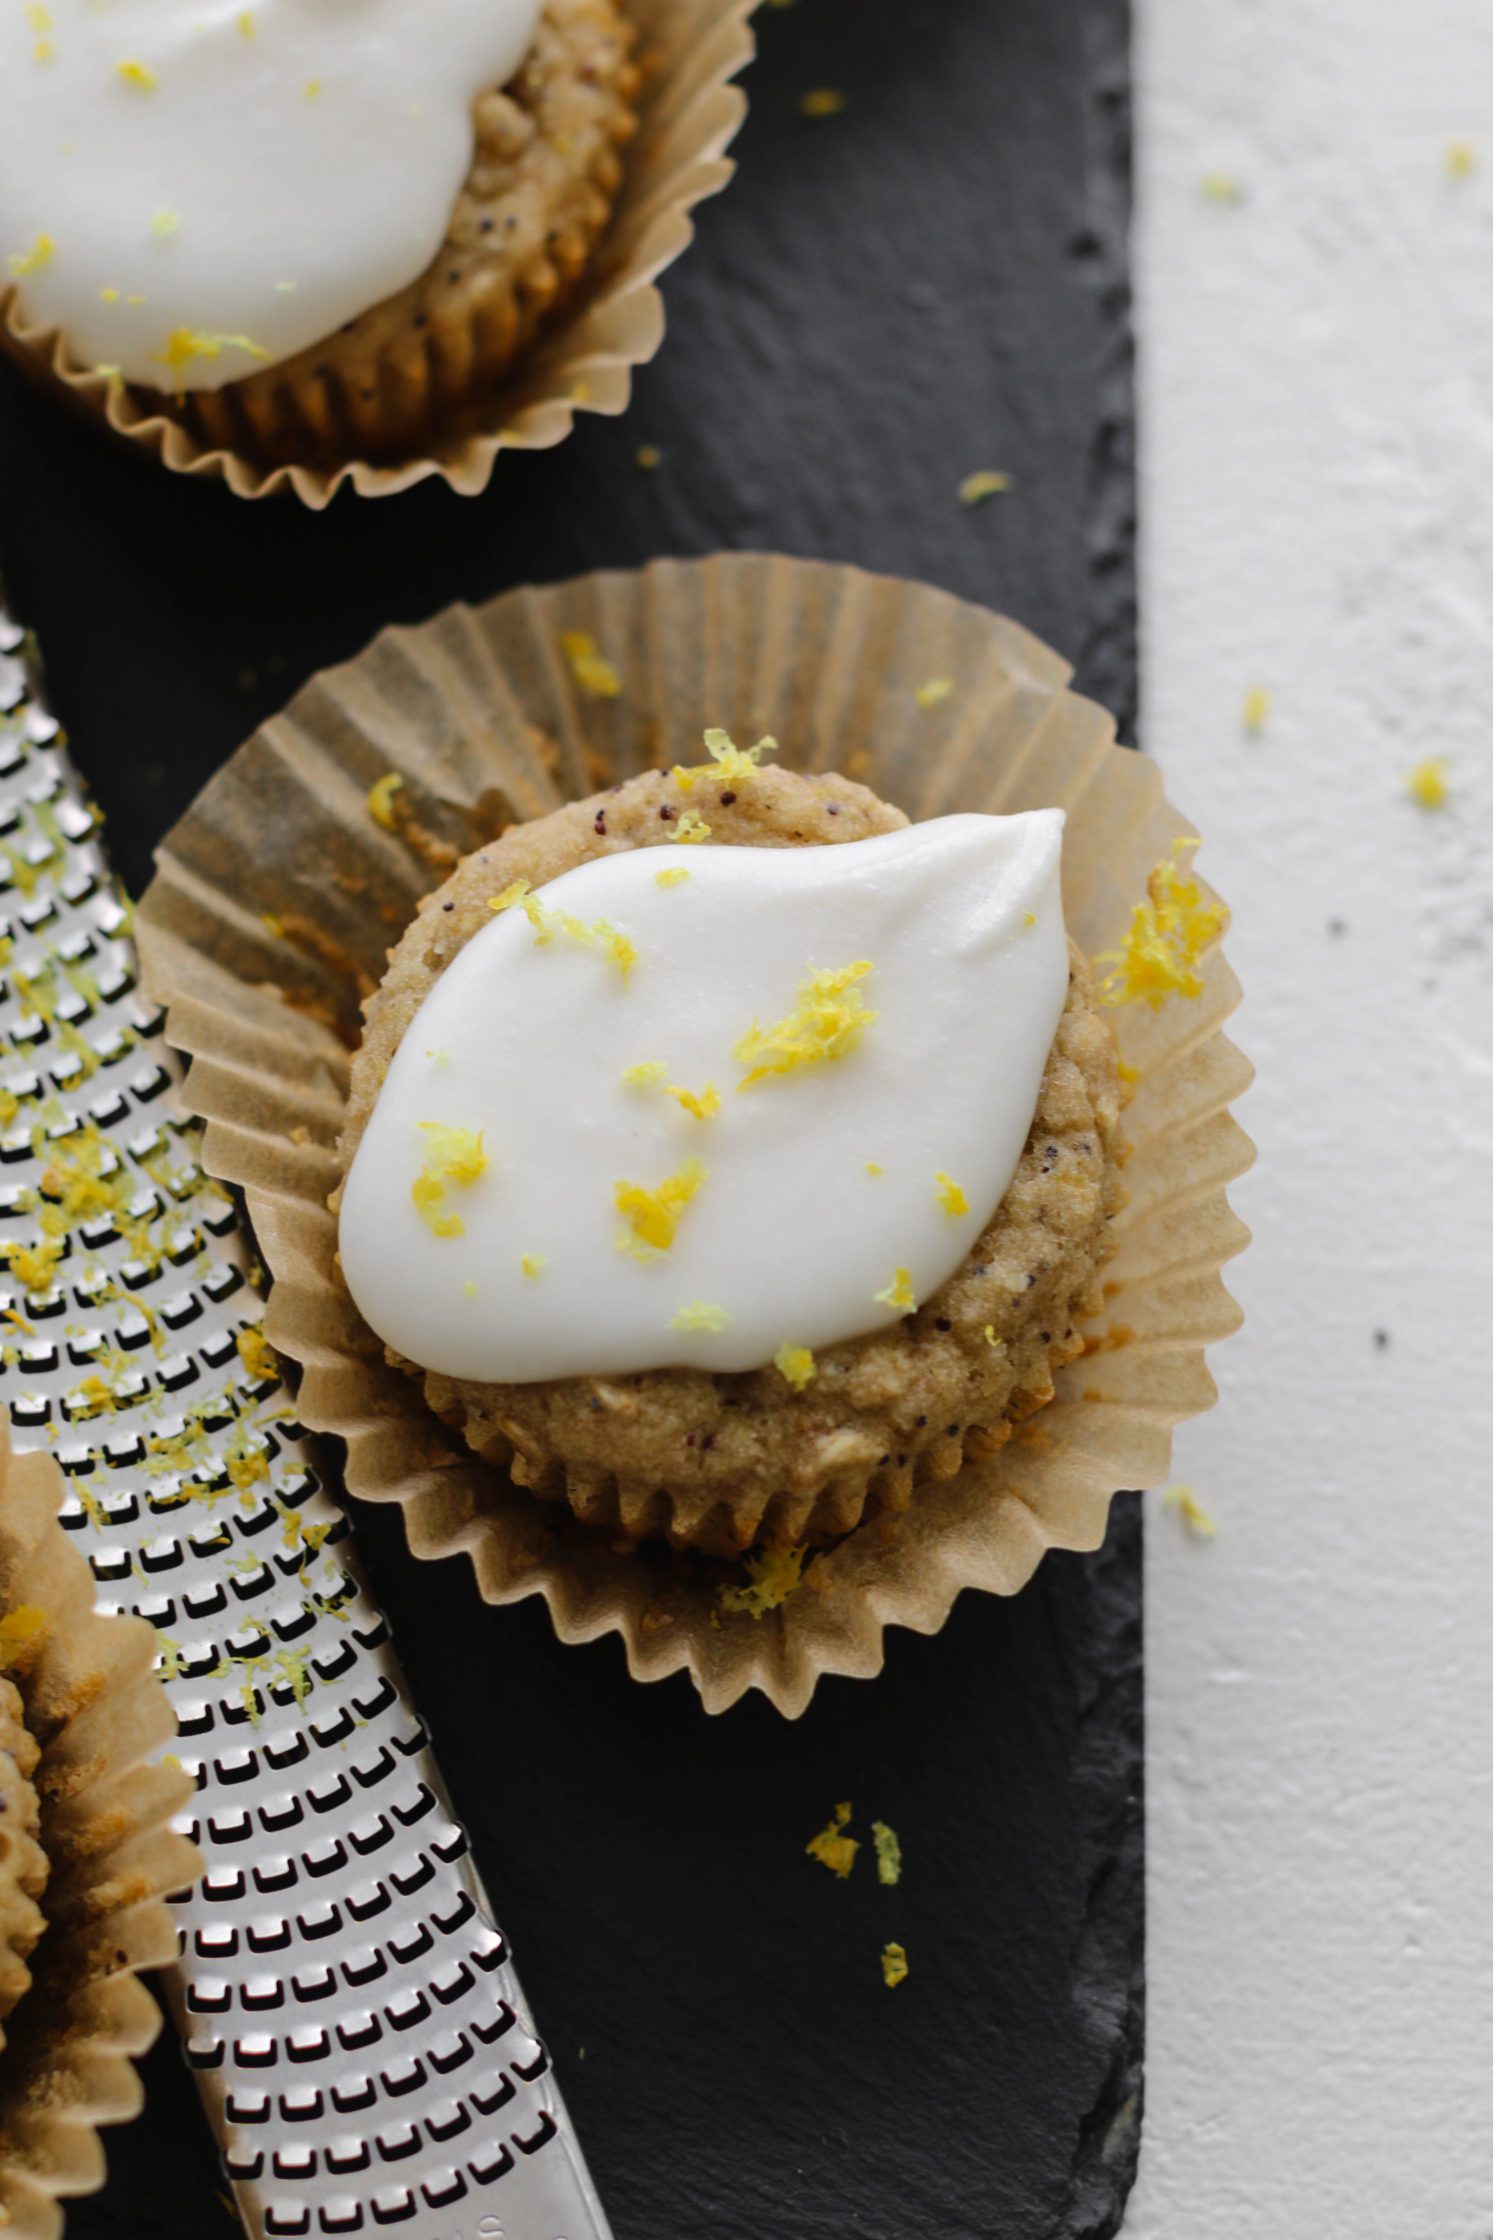 Lemon Poppyseed Muffins with Coconut Butter Glaze by Flora & Vino